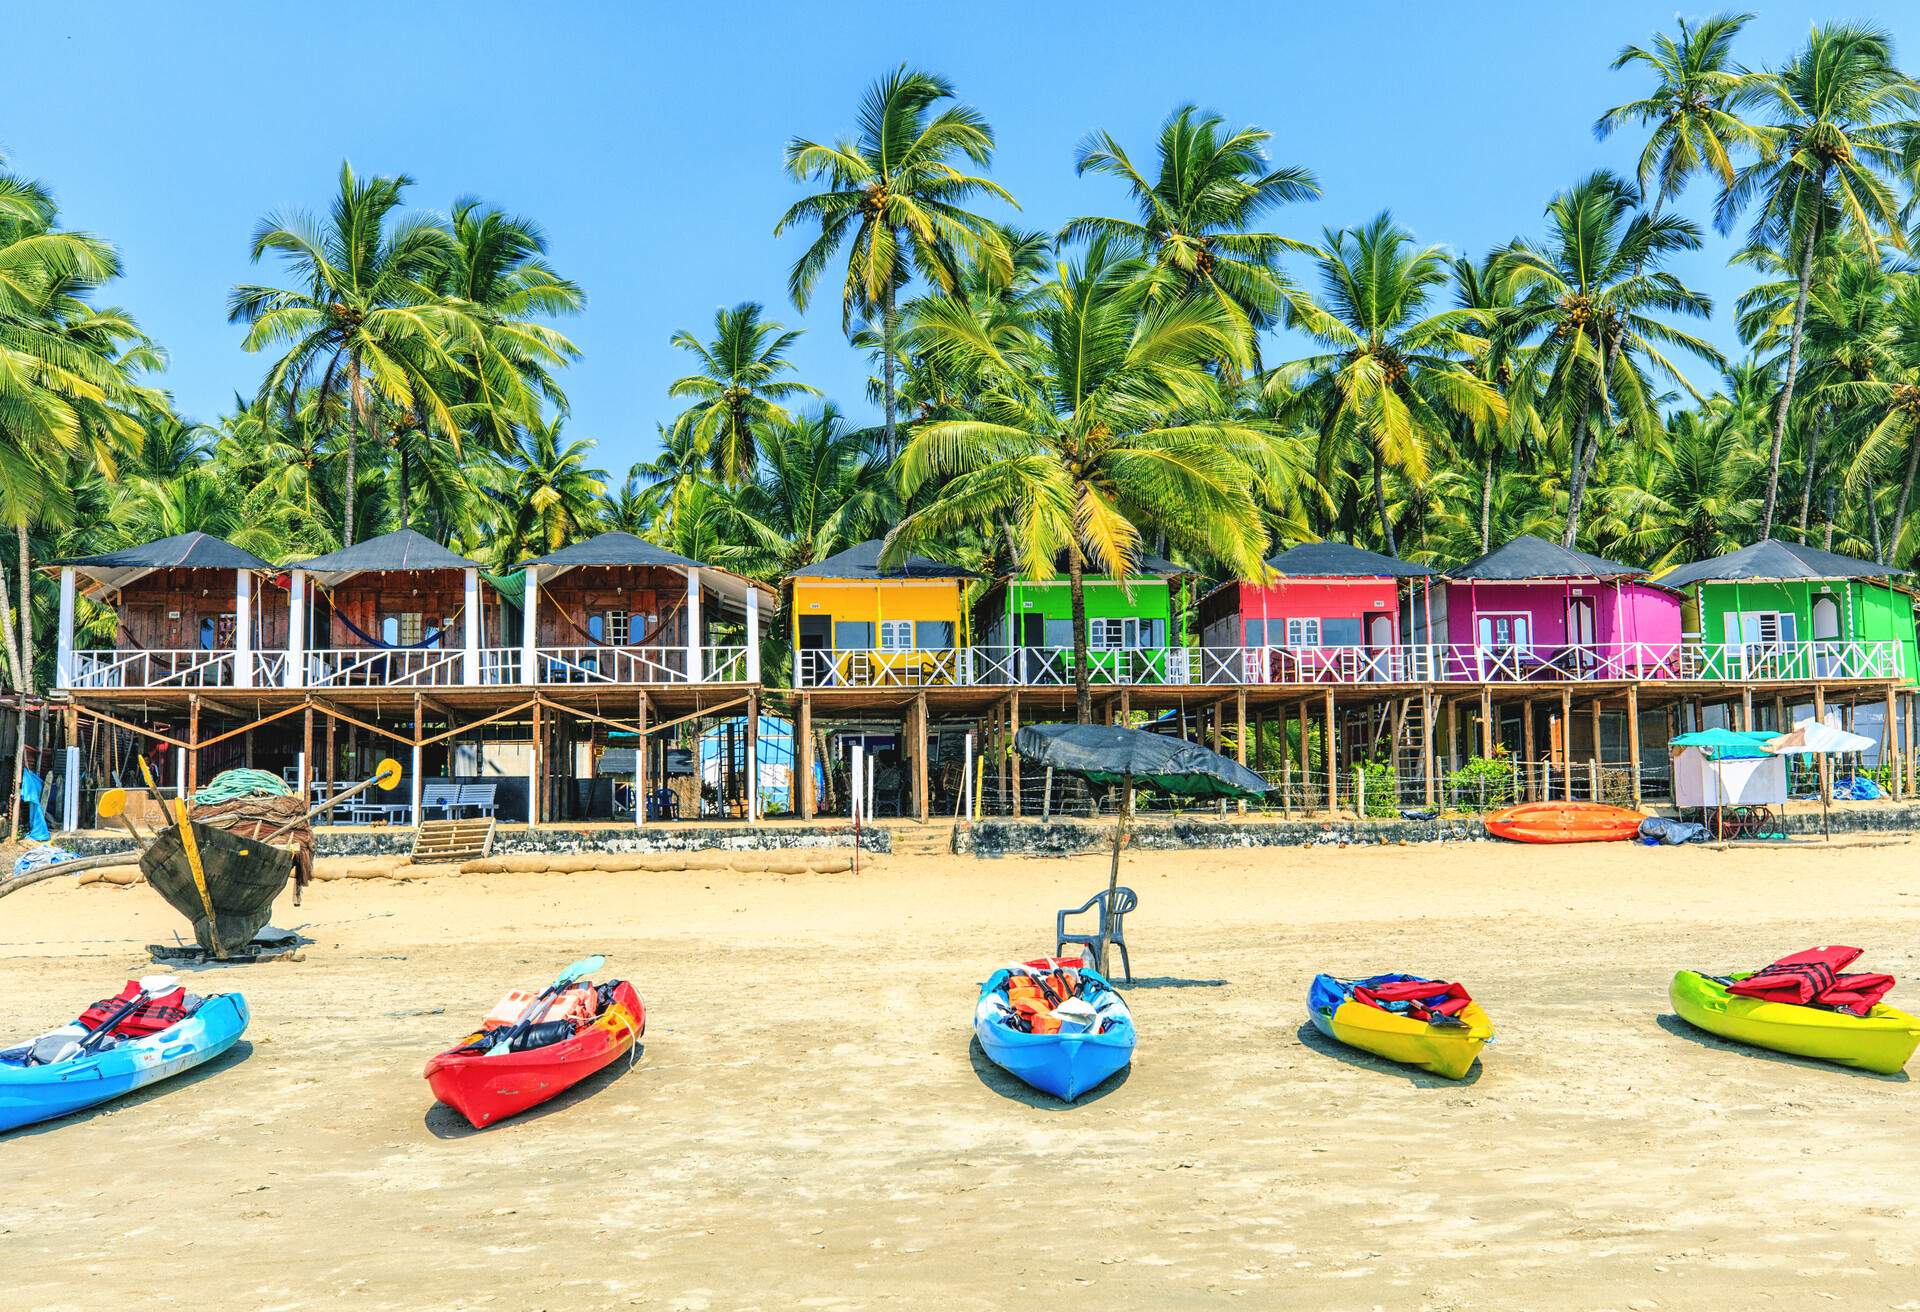 Colorful bungalows on Palolem beach, GOA, India; Shutterstock ID 761310913; Purchase Order: SF-06928905; Job: ; Client/Licensee: ; Other: